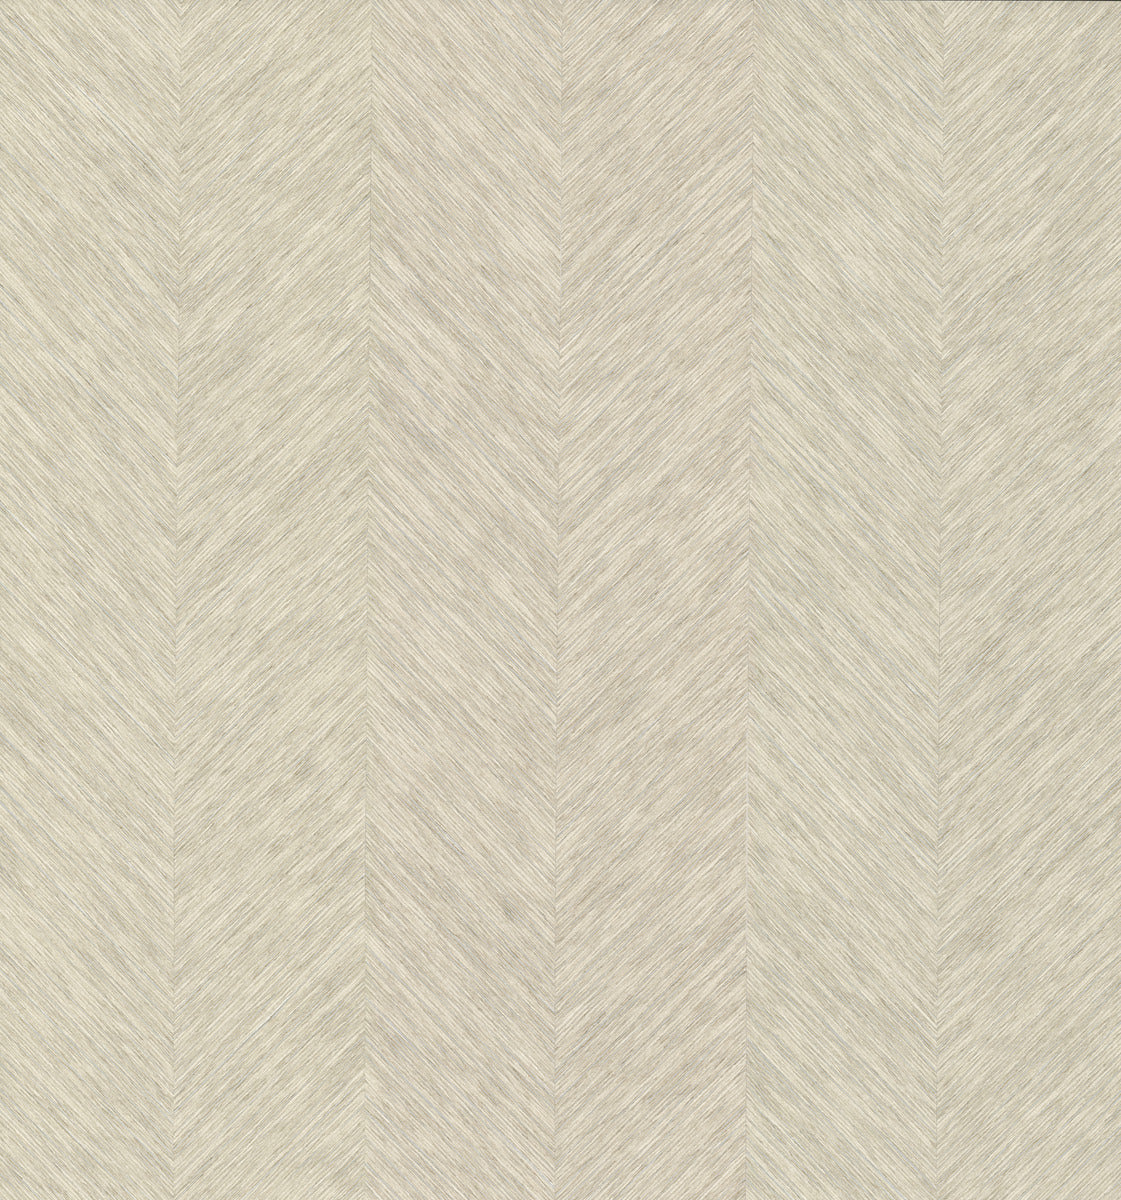 A seamless pattern of Metallic Chevron Wallpaper Cream fabric from Decor2Go Winnipeg in a light beige color, displaying a detailed, symmetric chevron design that provides a tactile appearance.